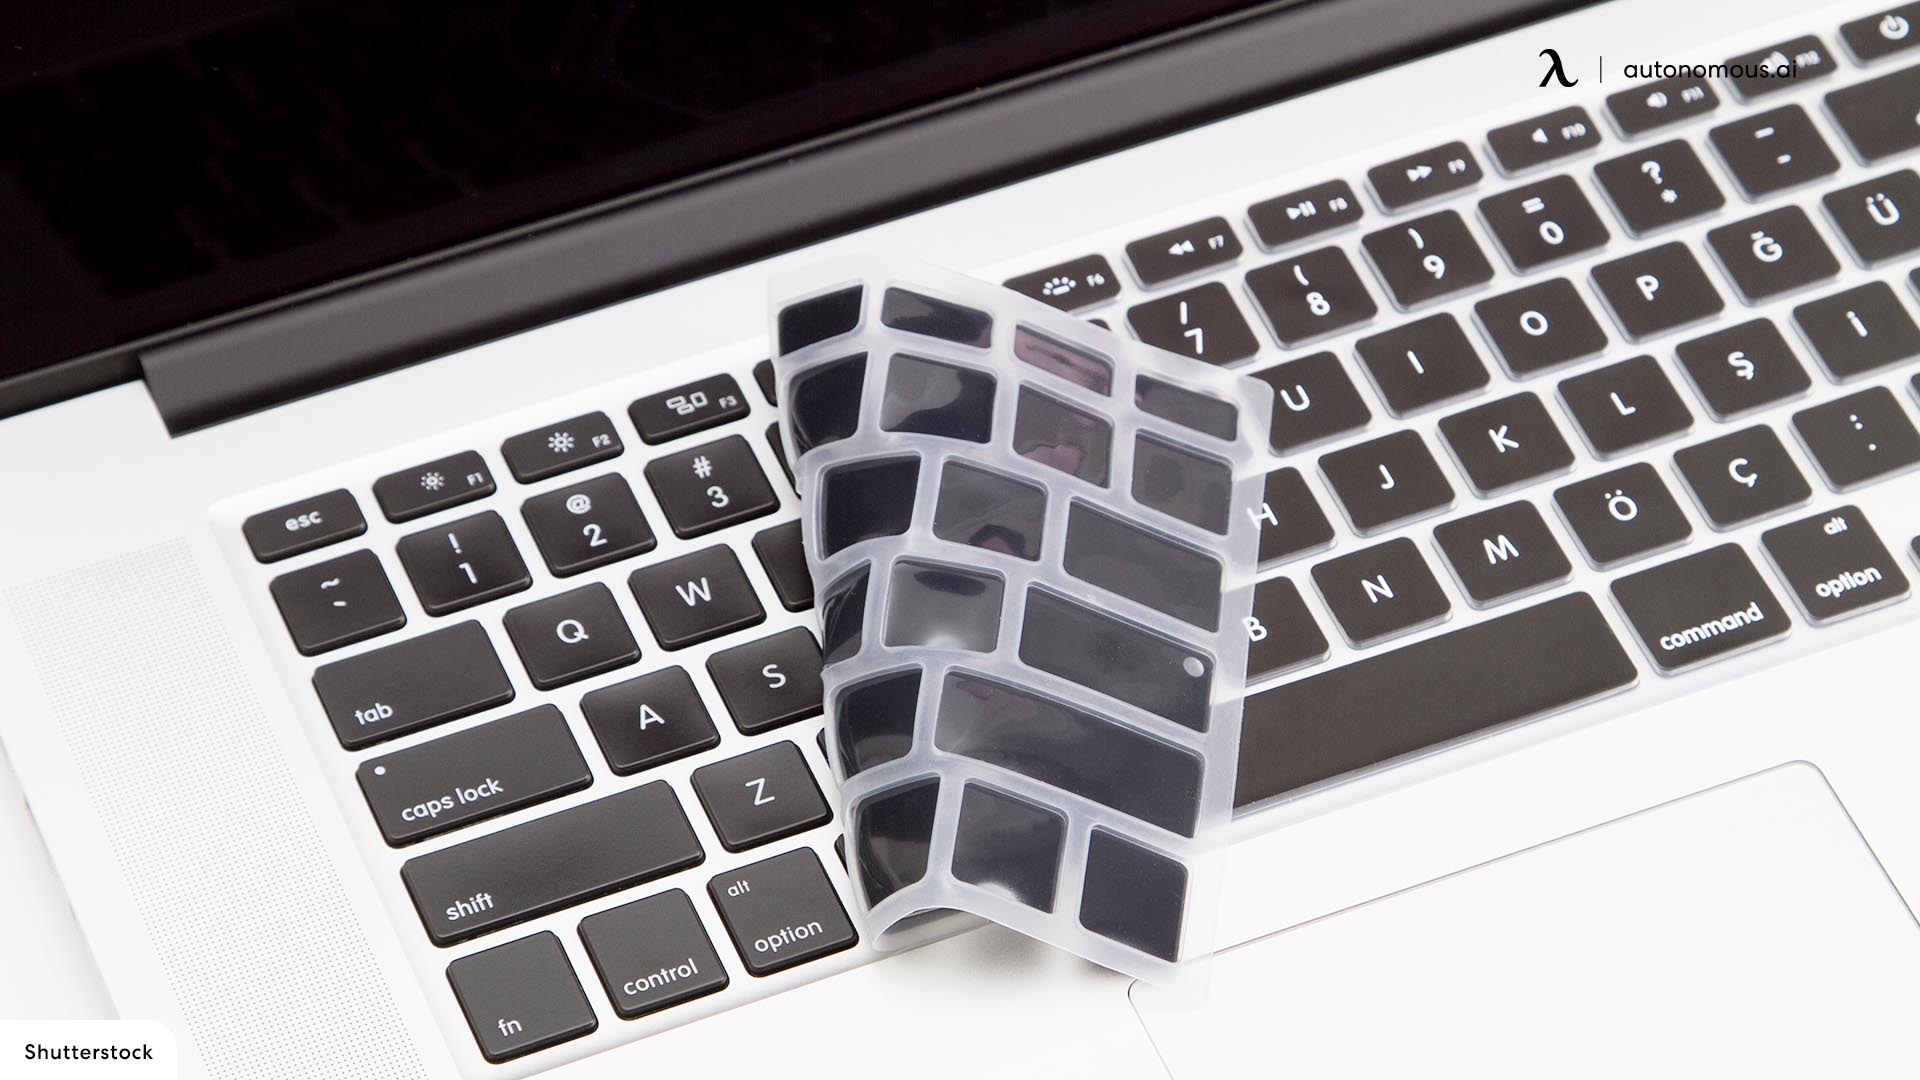 https://cdn.autonomous.ai/static/upload/images/common/upload/20211027/14-Desk-Accessories-for-Men-That-are-Cool--Expensive-Looking_11cad2ab8e49.jpg